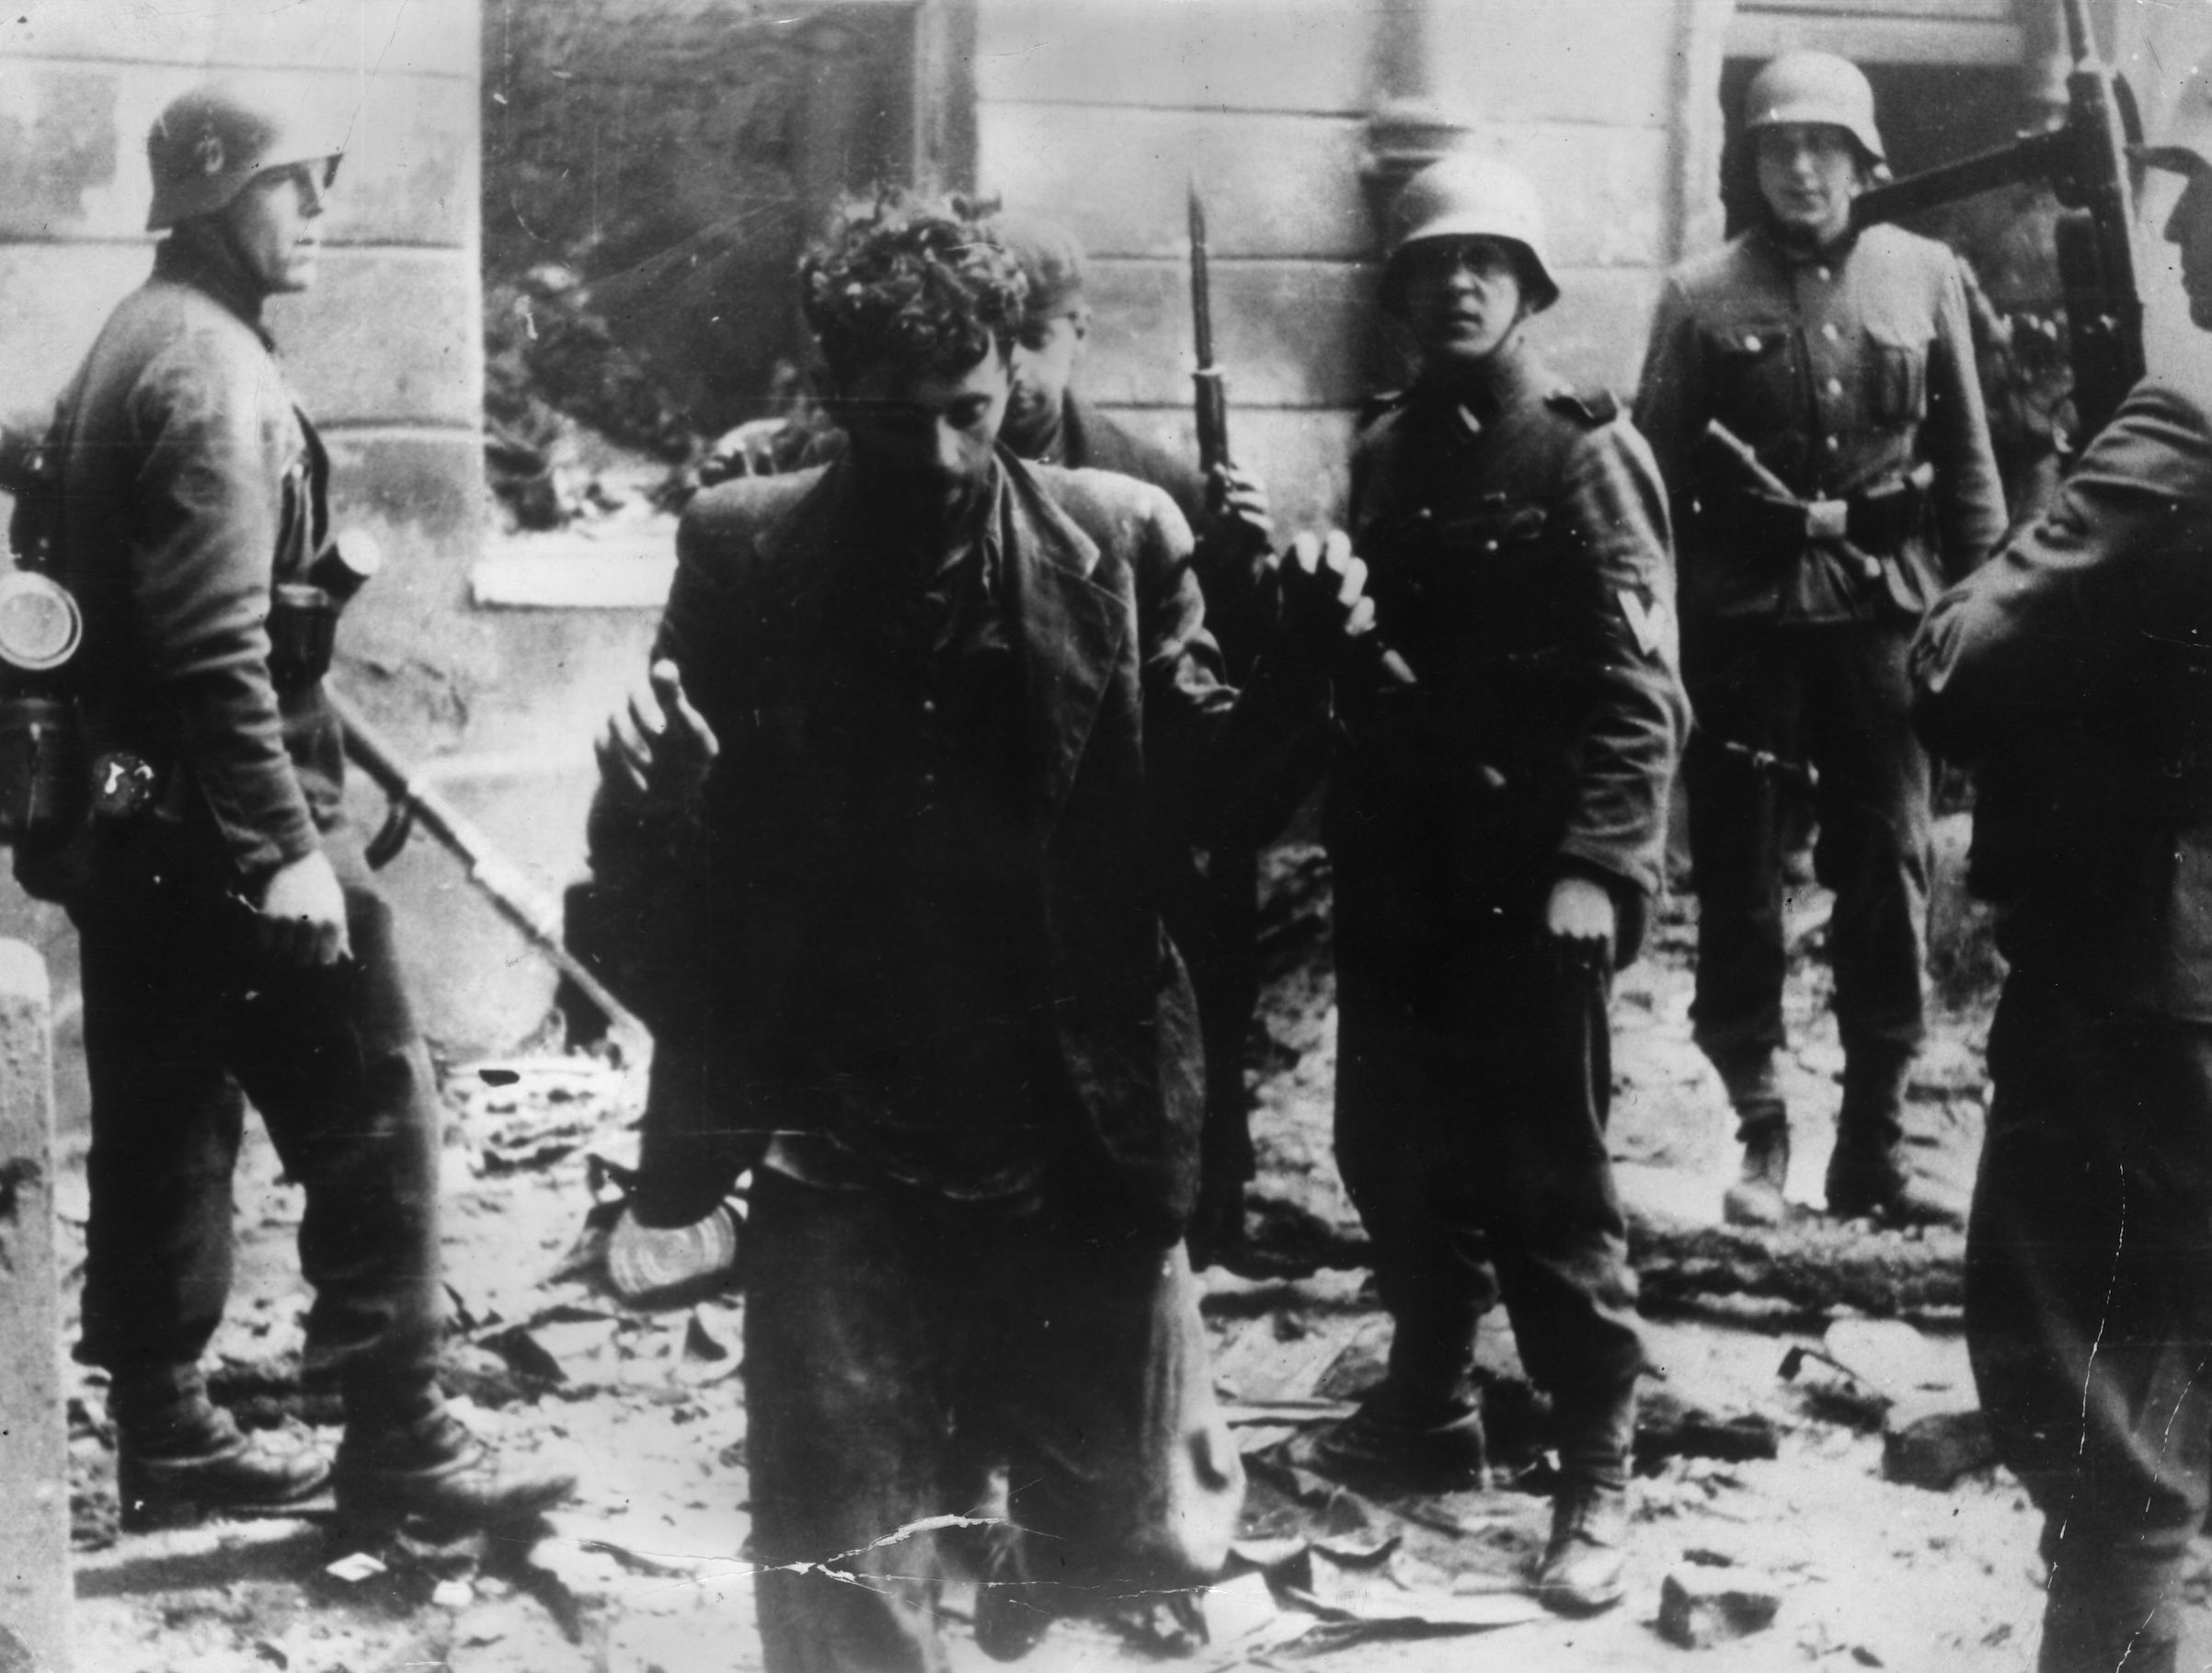 April 1943:  Two Jewish resistance fighters arrested by German troops during the Warsaw Ghetto Uprising. (Keystone/Getty Images)